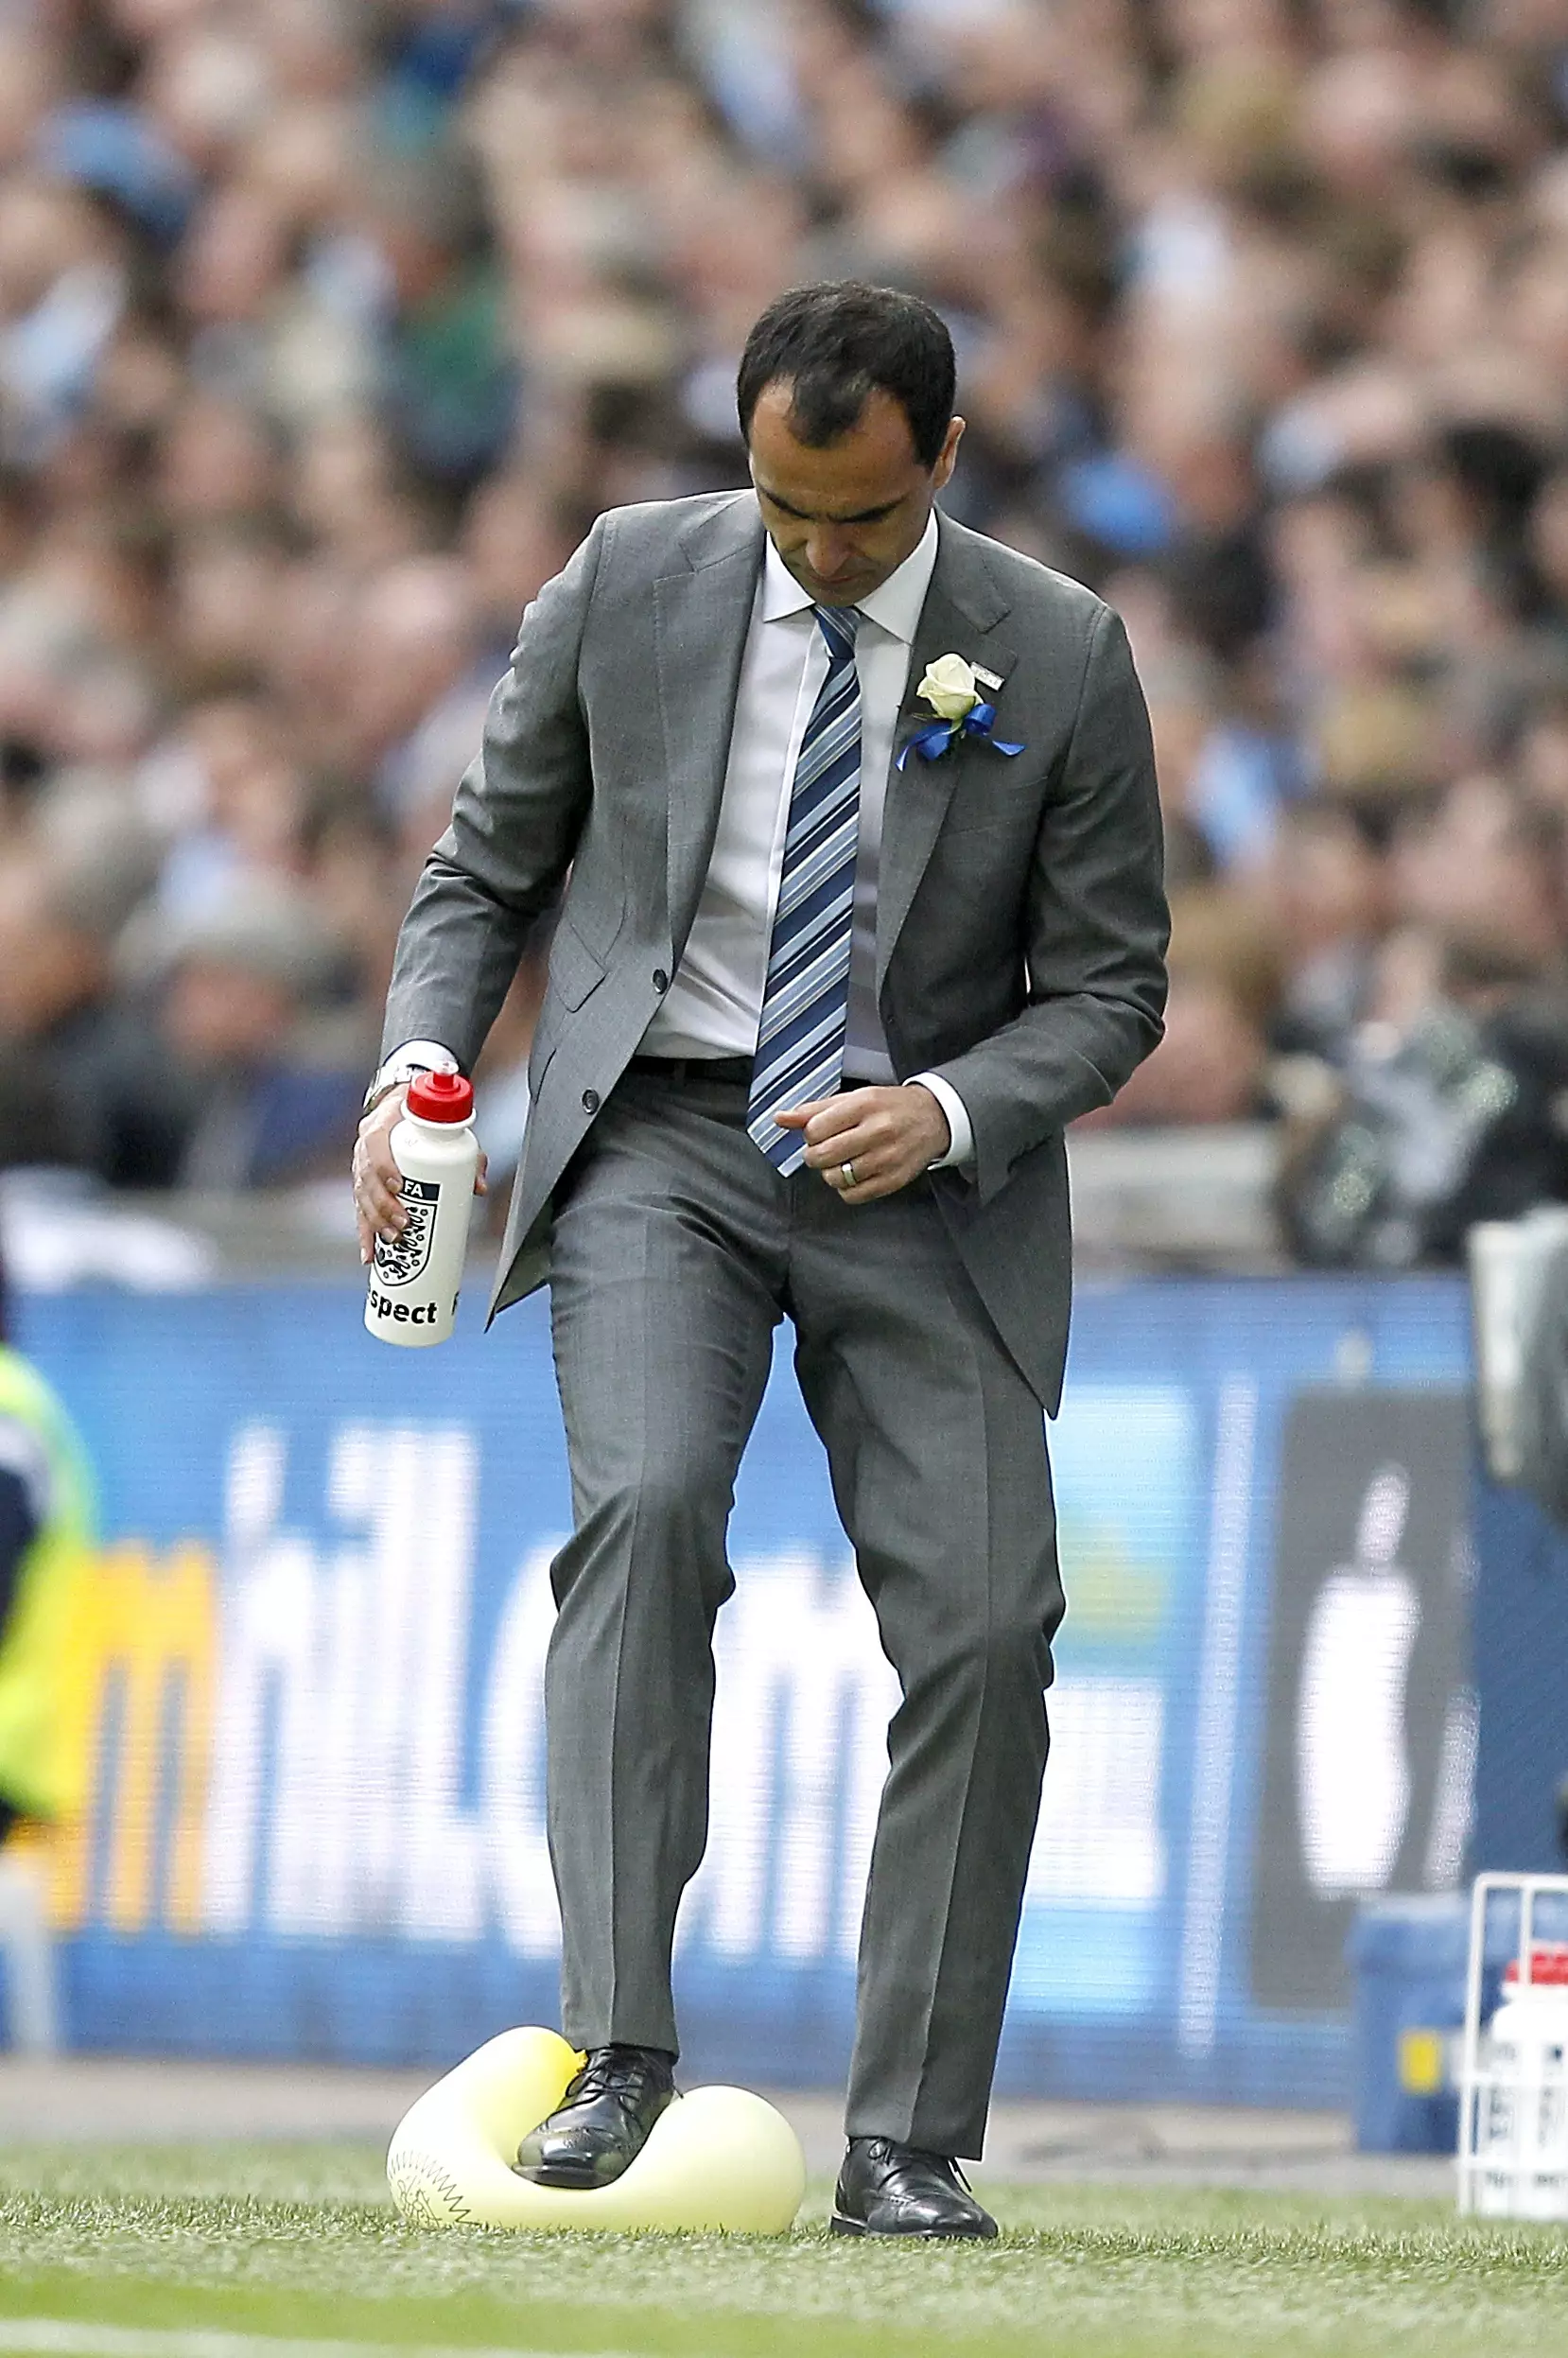 Roberto Martinez looks like he would be in favour of a balloon ban.